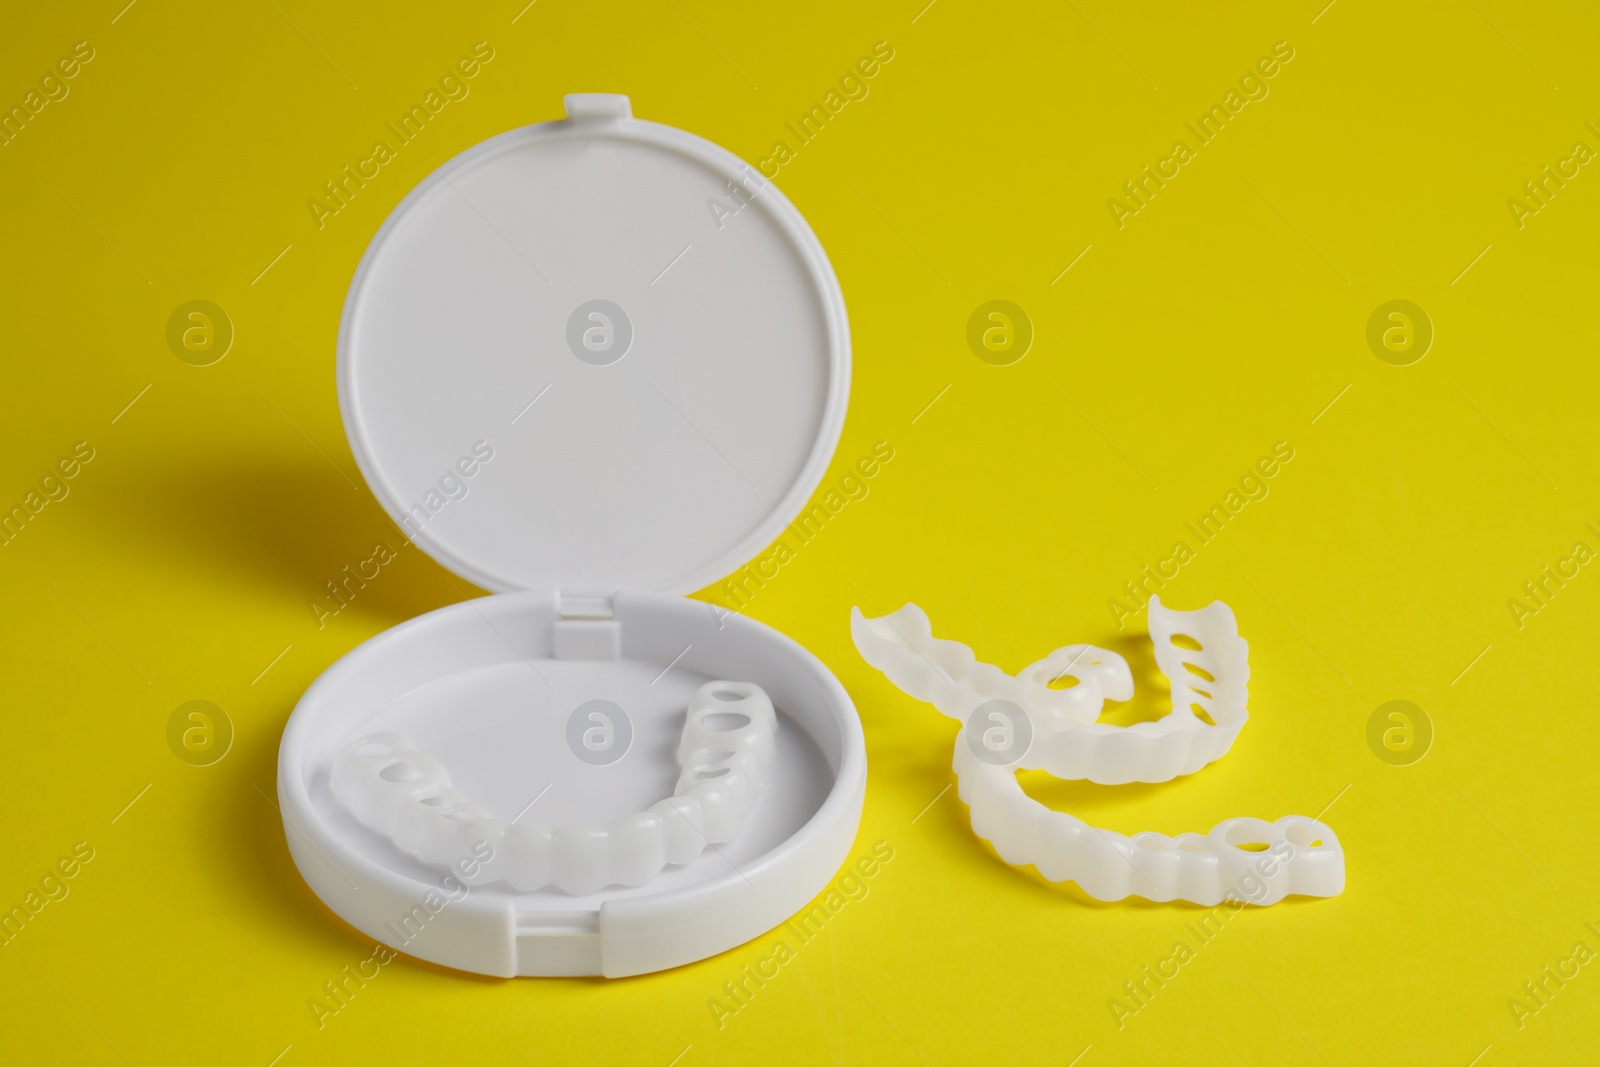 Photo of Dental mouth guards on yellow background. Bite correction